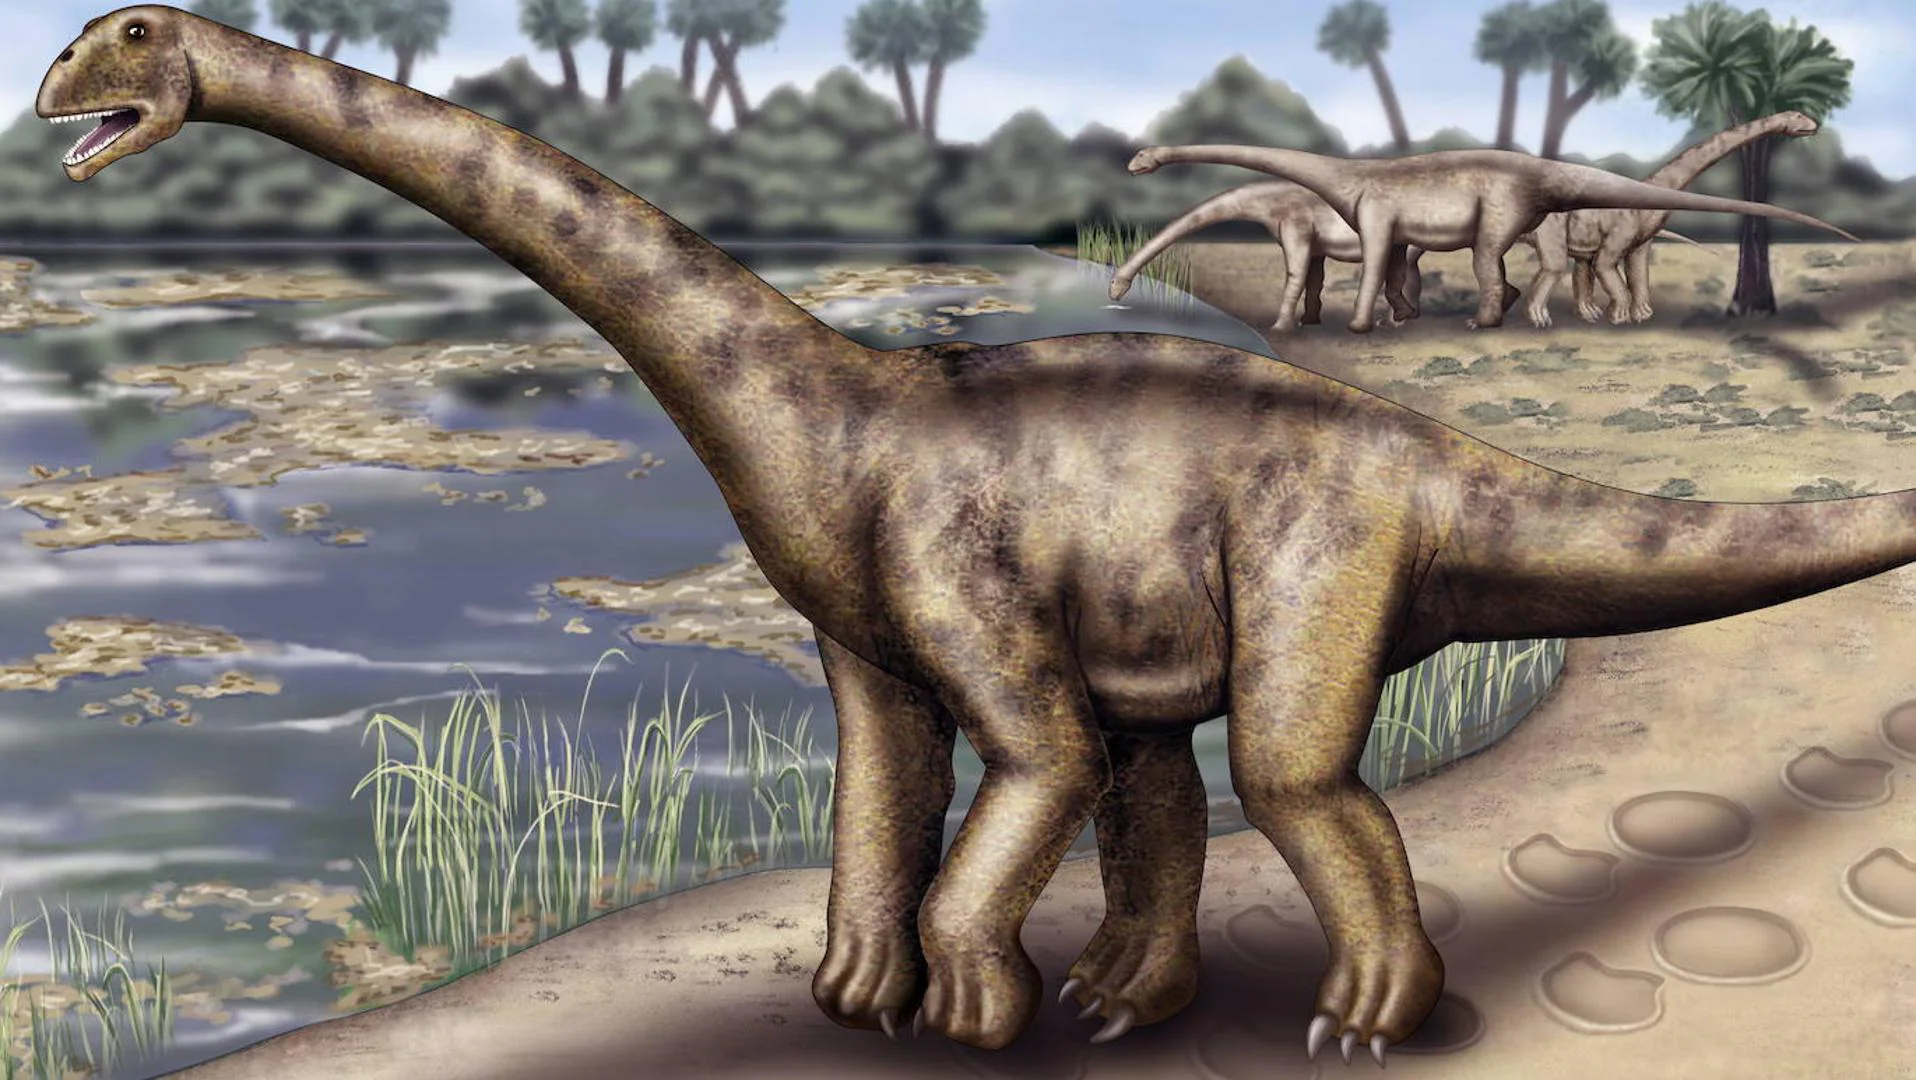 How could the largest dinosaurs have weighed 90 tons?